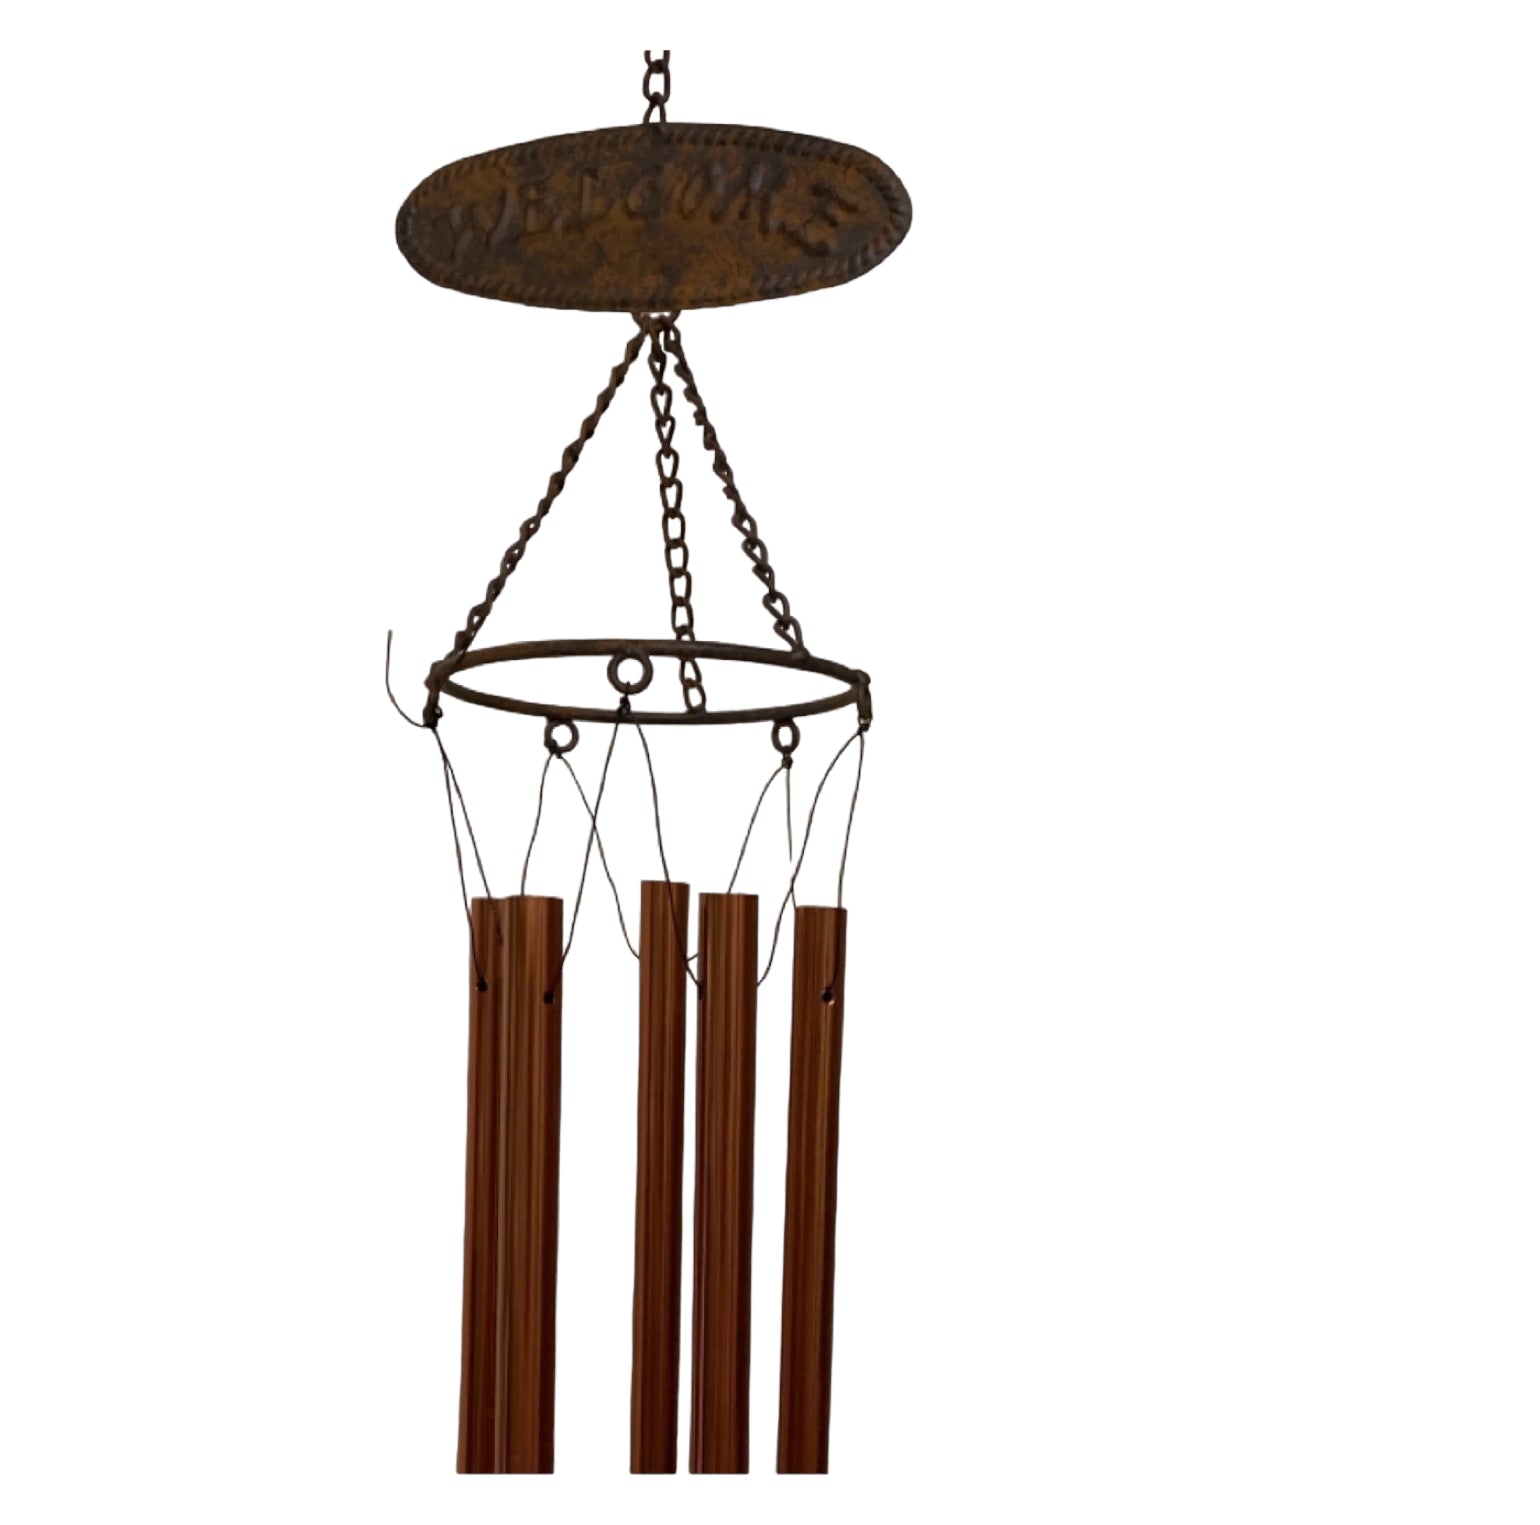 Wind Chime Vintage Welcome Family Tree - The Renmy Store Homewares & Gifts 